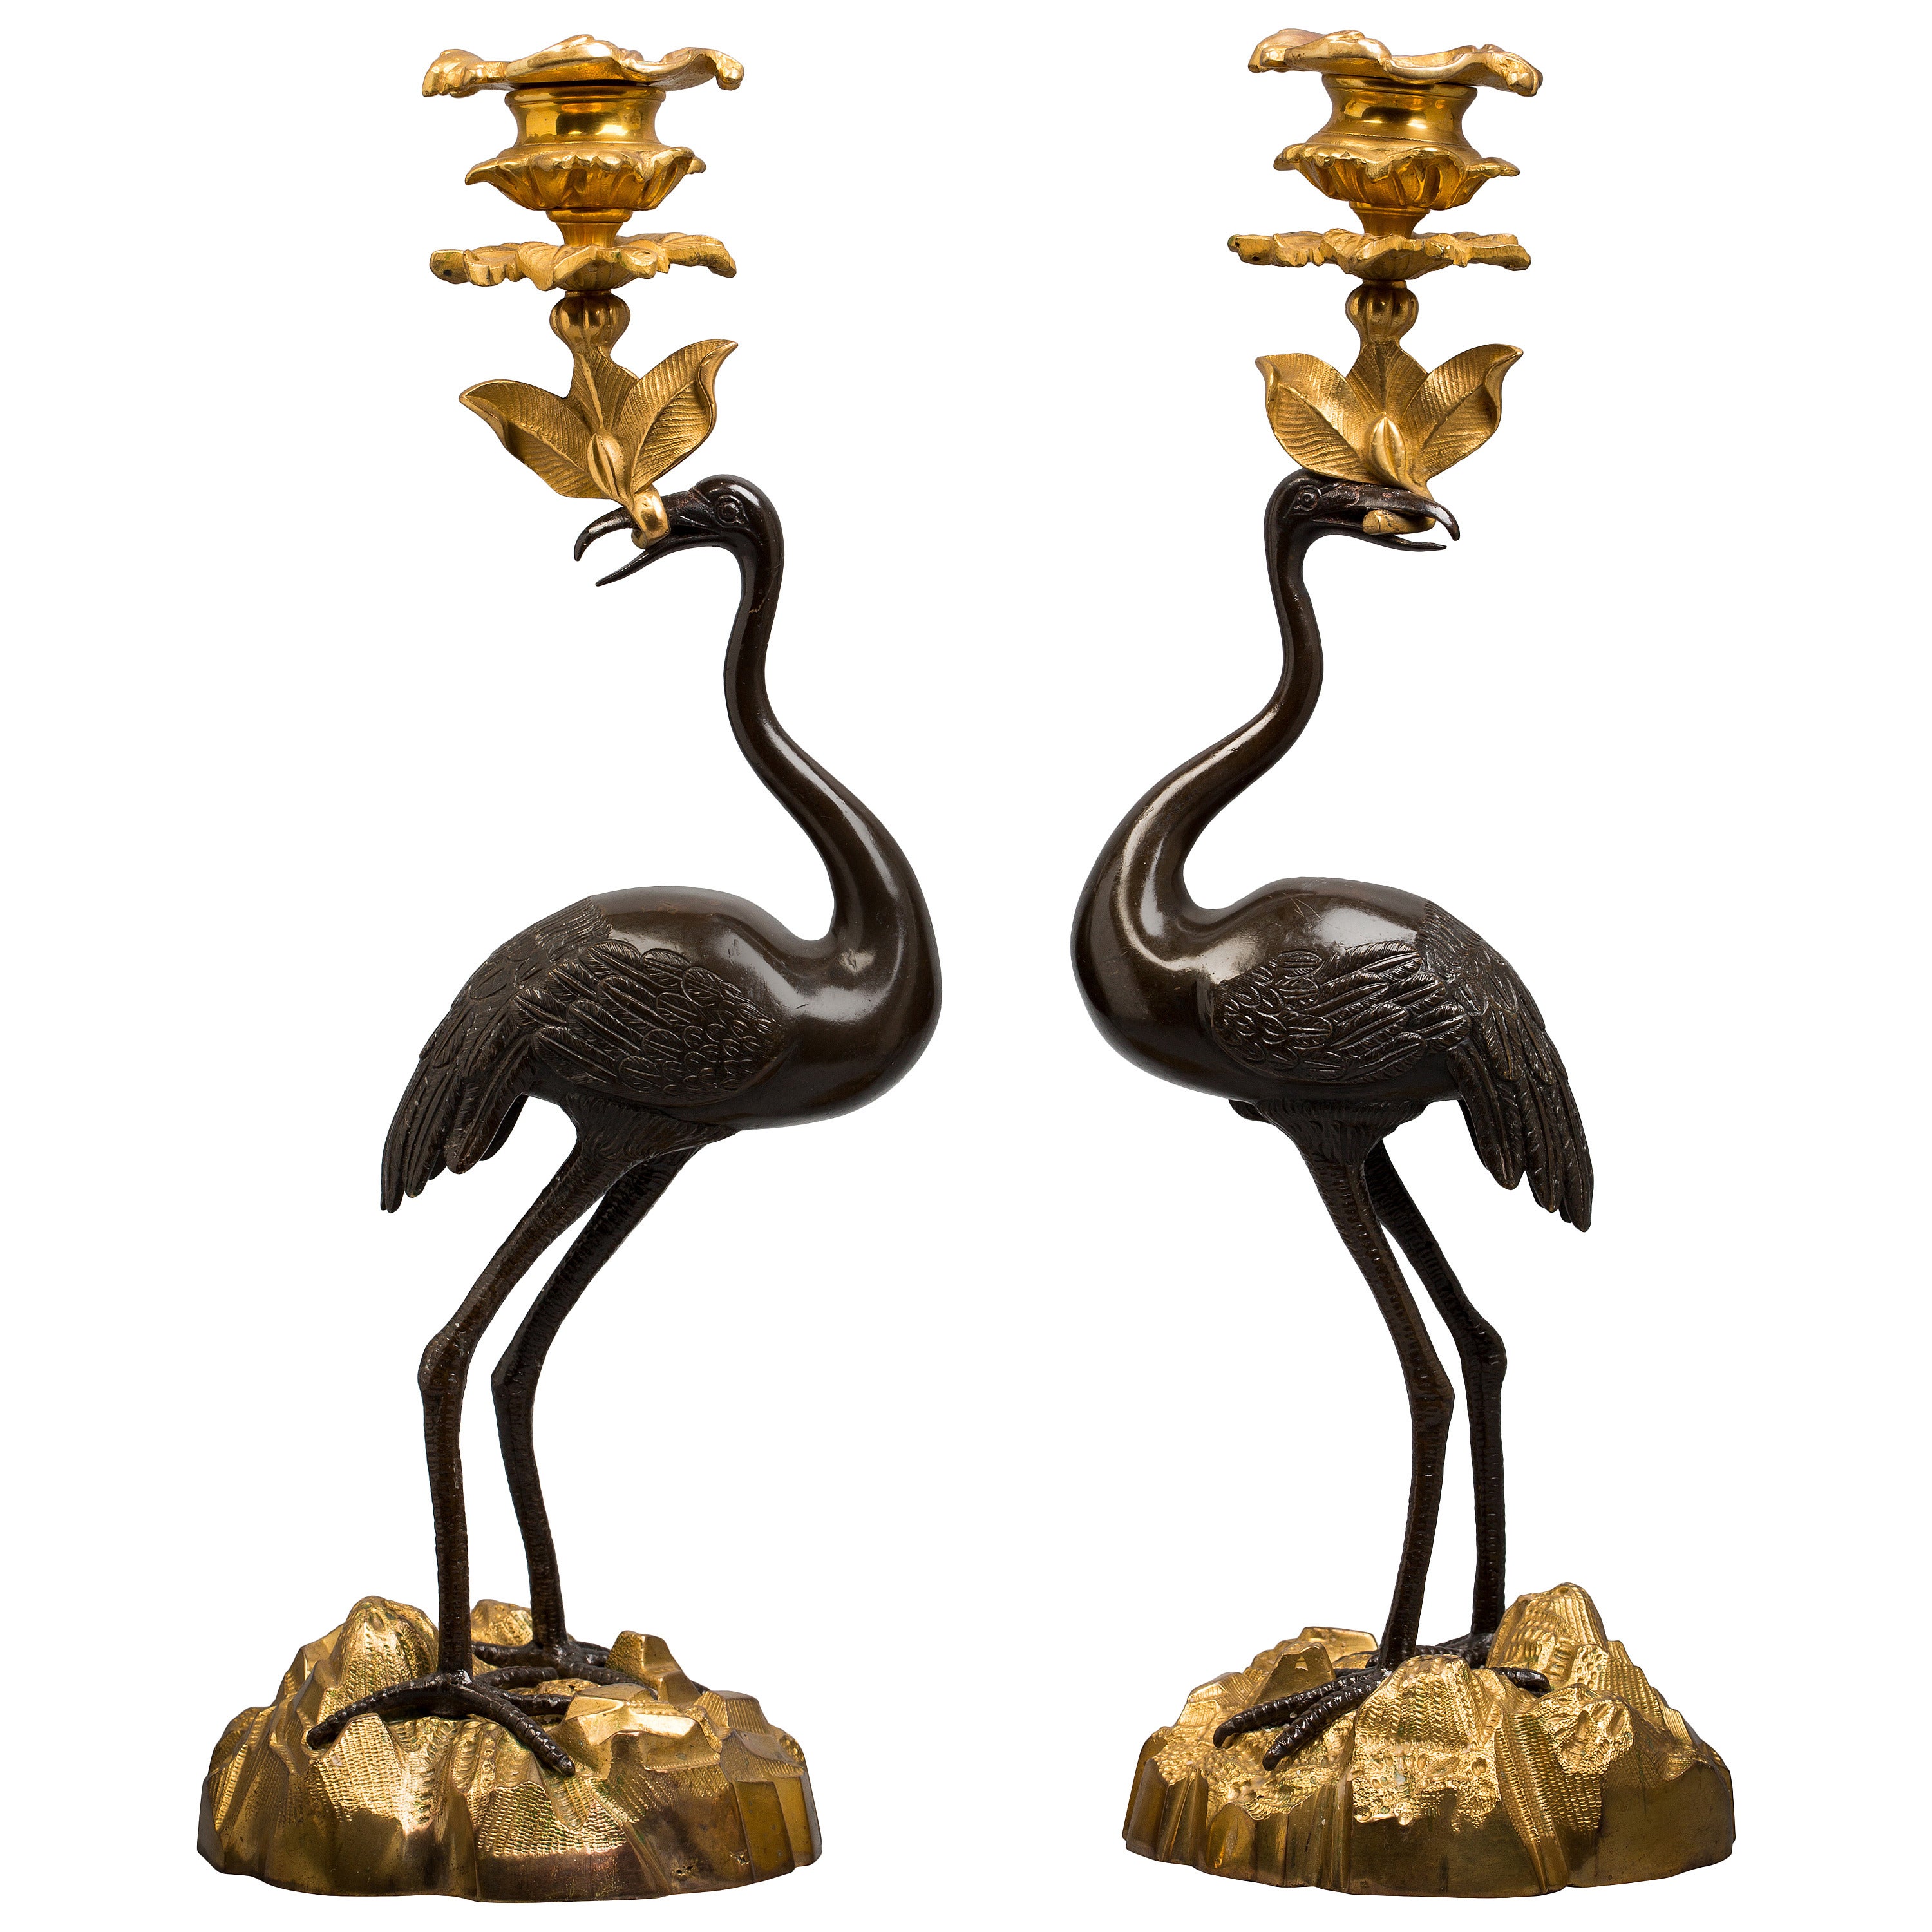 Pair of Gilt and Patinated Bronze Candlesticks, French, circa 1875